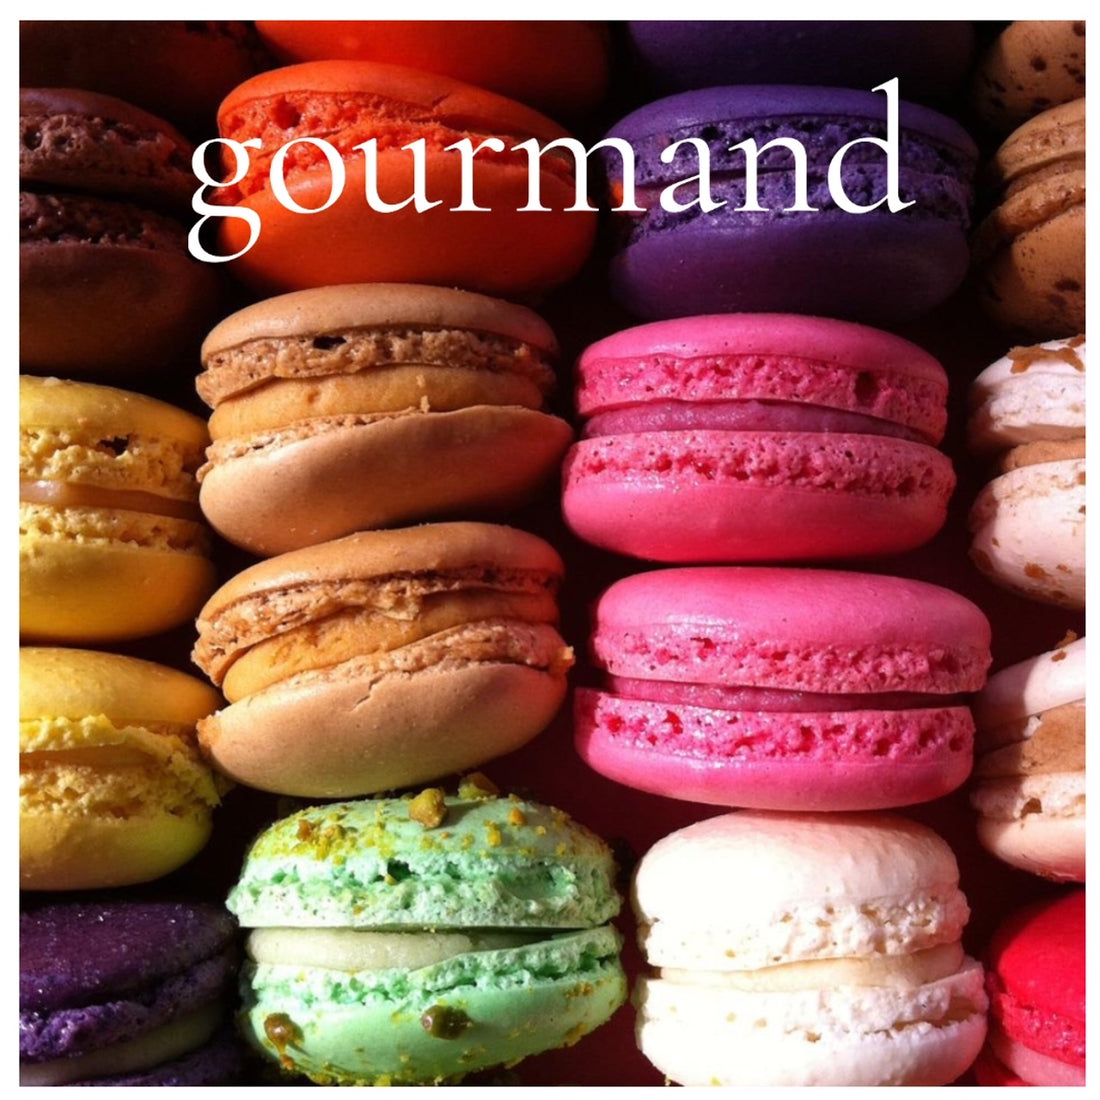 PERFUME SAMPLE SET - 28 piece GOURMAND Scents Collection, plus 3 Free Samples